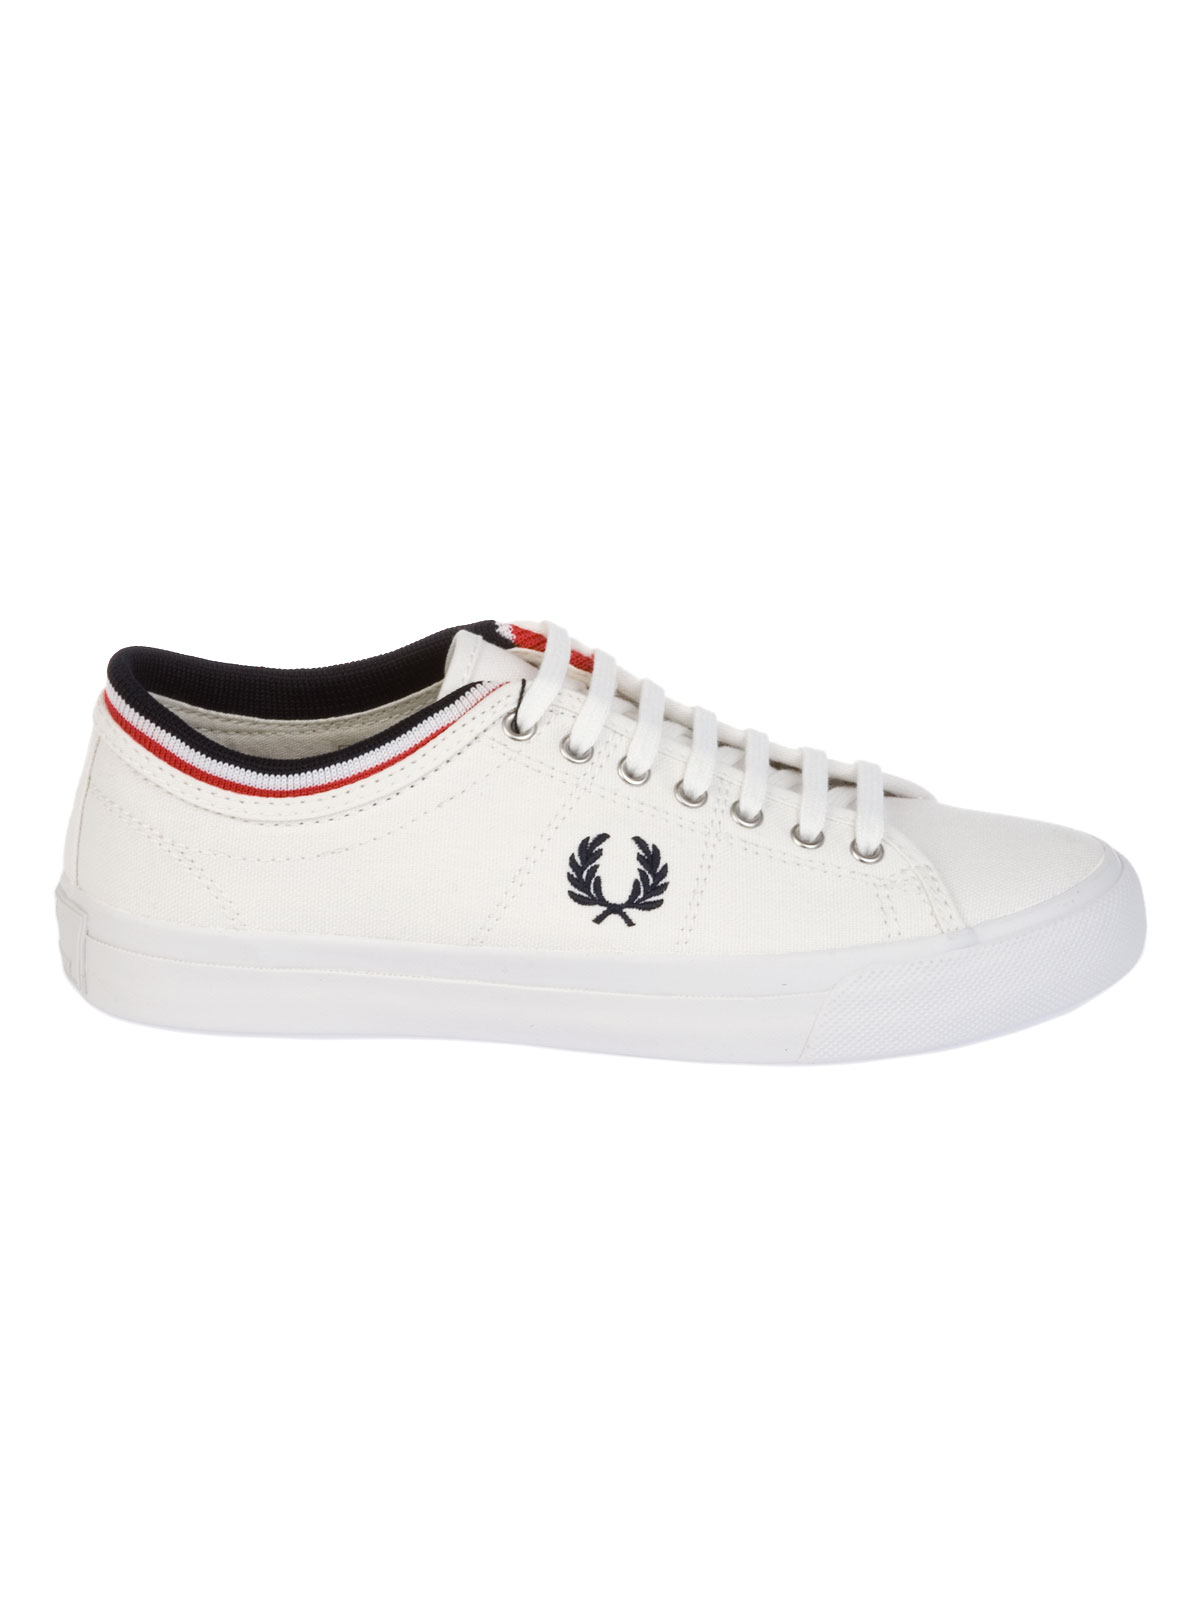 Fred Perry Kendrick Canvas Shoe White 